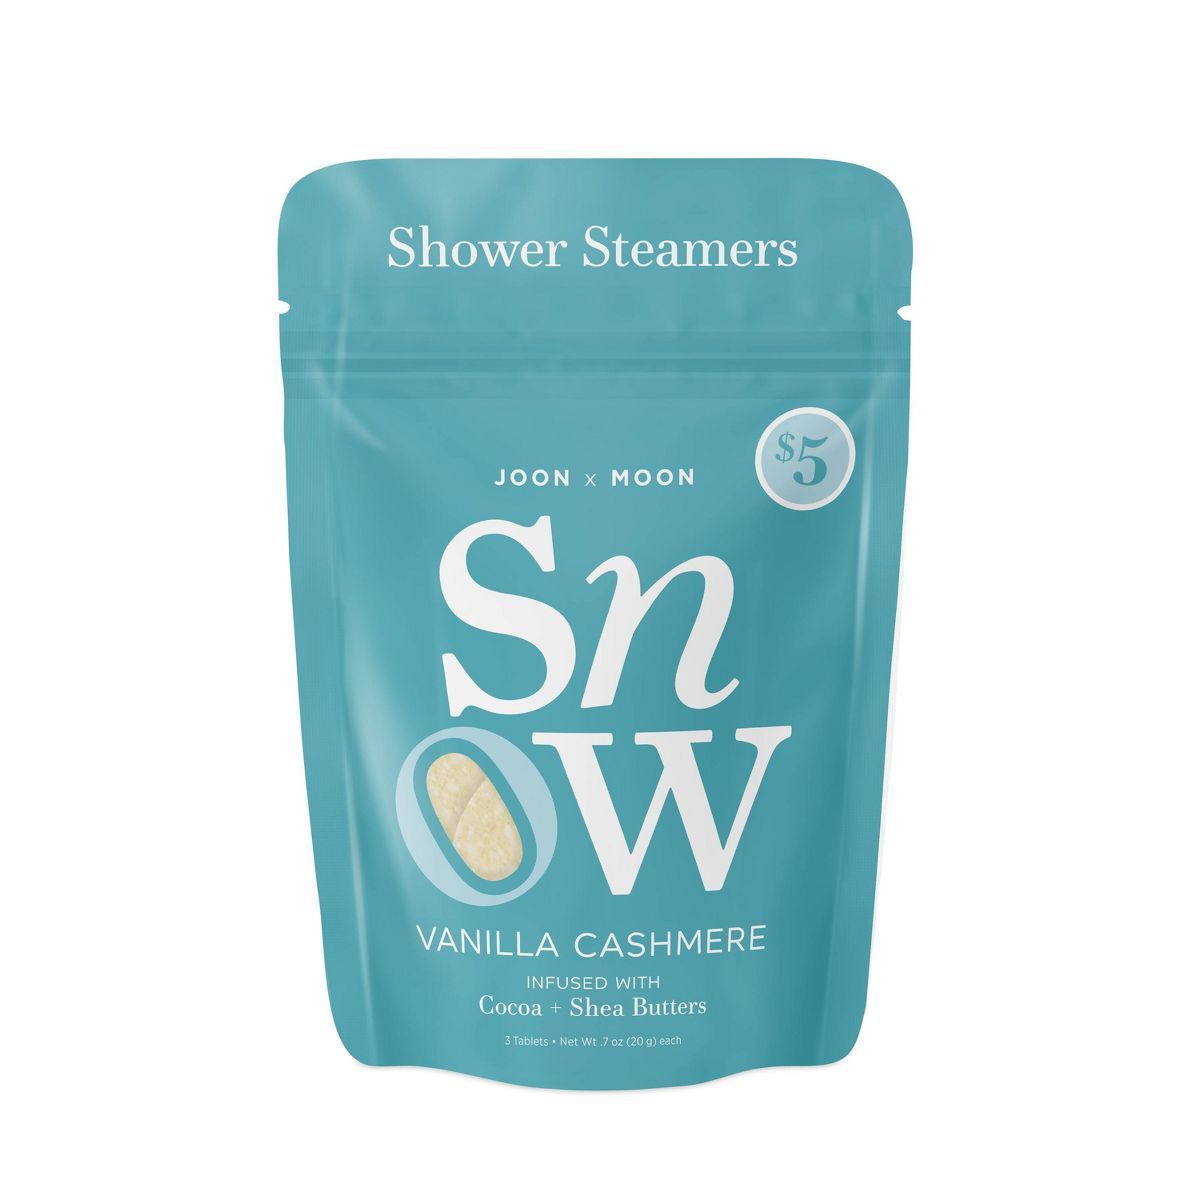 Joon X Moon Snow Lavender, Vanilla and Peppermint Shower Steamers - 3ct | Target